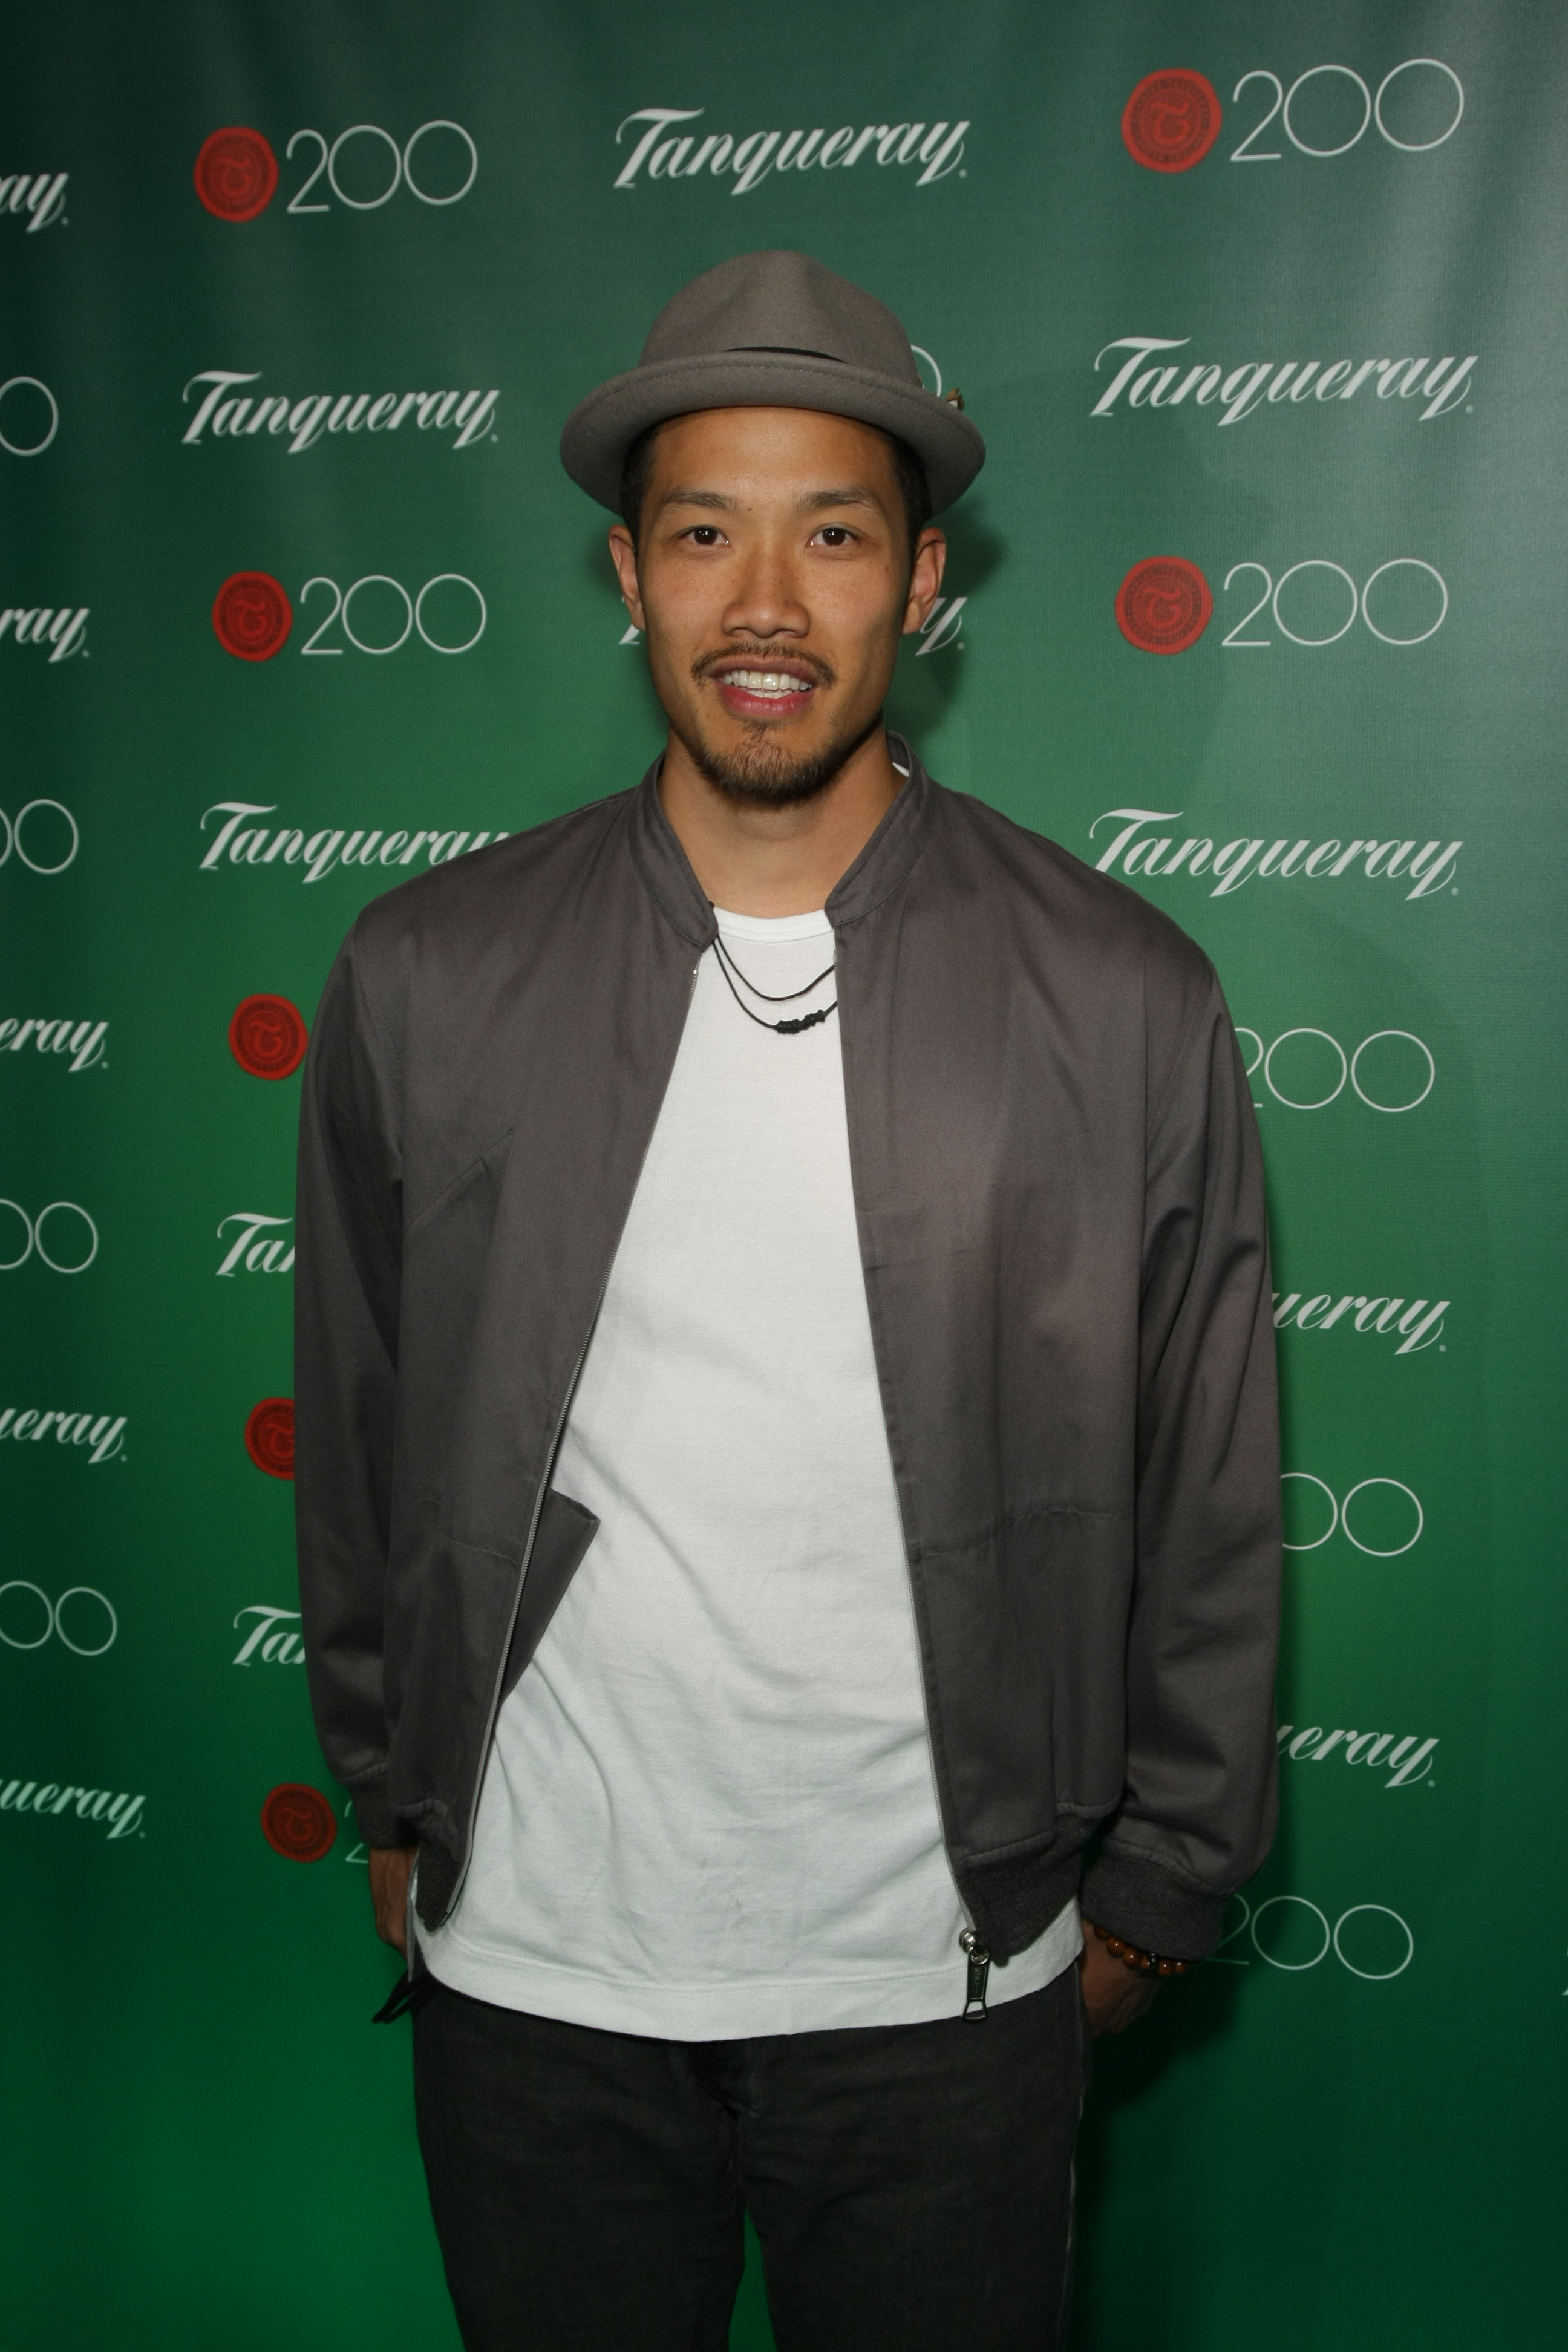 Fashion Designer Dao Yi Chow at Tanqueray Event HIRES